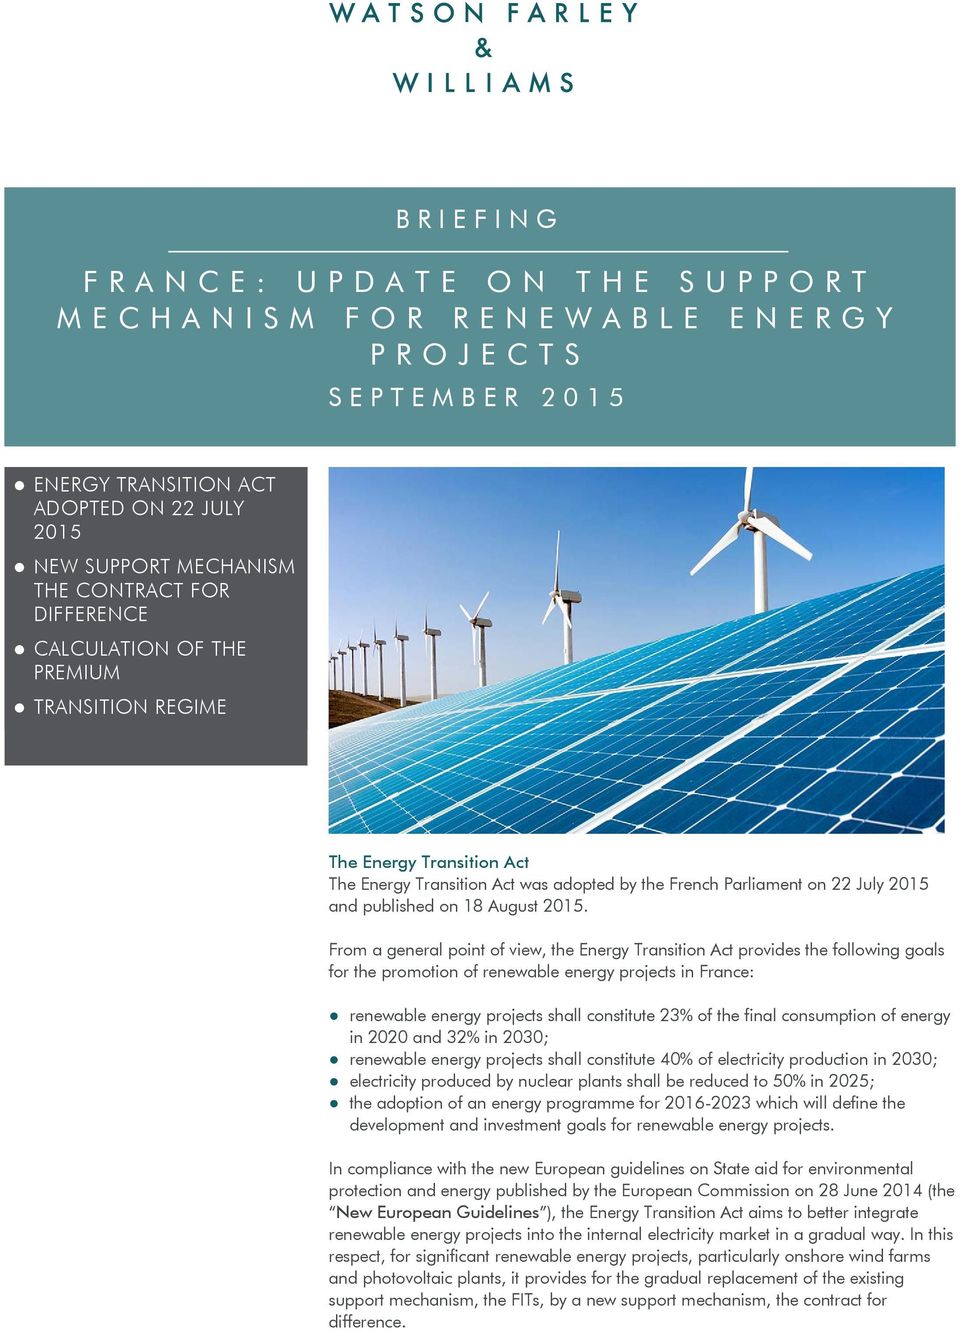 From a general point of view, the Energy Transition Act provides the following goals for the promotion of renewable energy projects in France: renewable energy projects shall constitute 23% of the